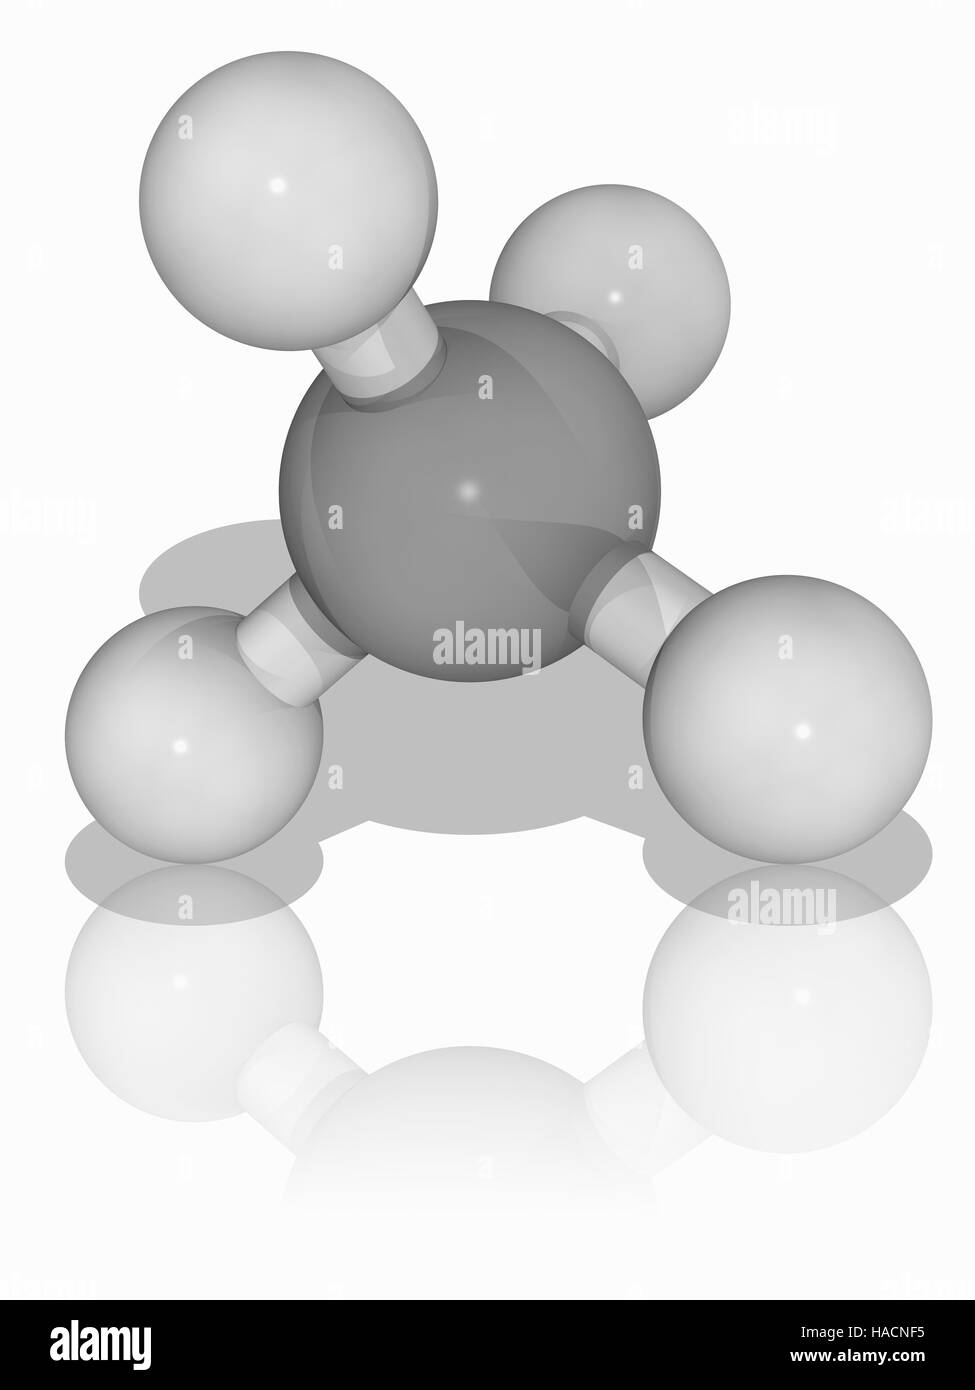 Methane. Molecular model of the alkane and hydrocarbon gas methane (CH4). It is the principal component of natural gas. It is the simplest possible alkane. Atoms are represented as spheres and are colour-coded: carbon (grey) and hydrogen (white). Illustration. Stock Photo